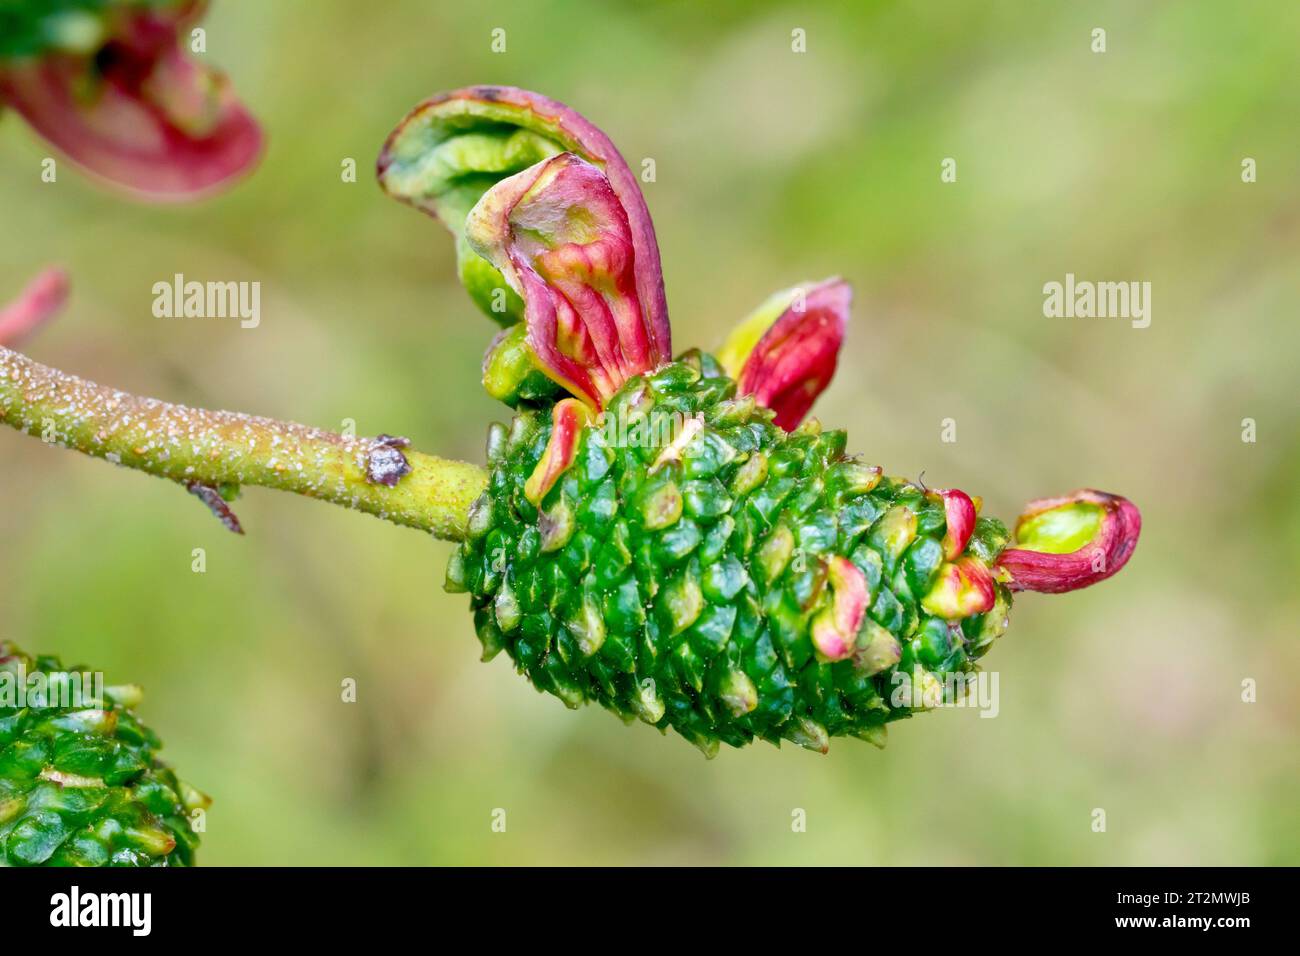 Alder Tongue (taphrina alni or taphrina amentorum), close up of the red fungal gall growing on the female fruits or catkins of Alder (alnus glutinosa) Stock Photo